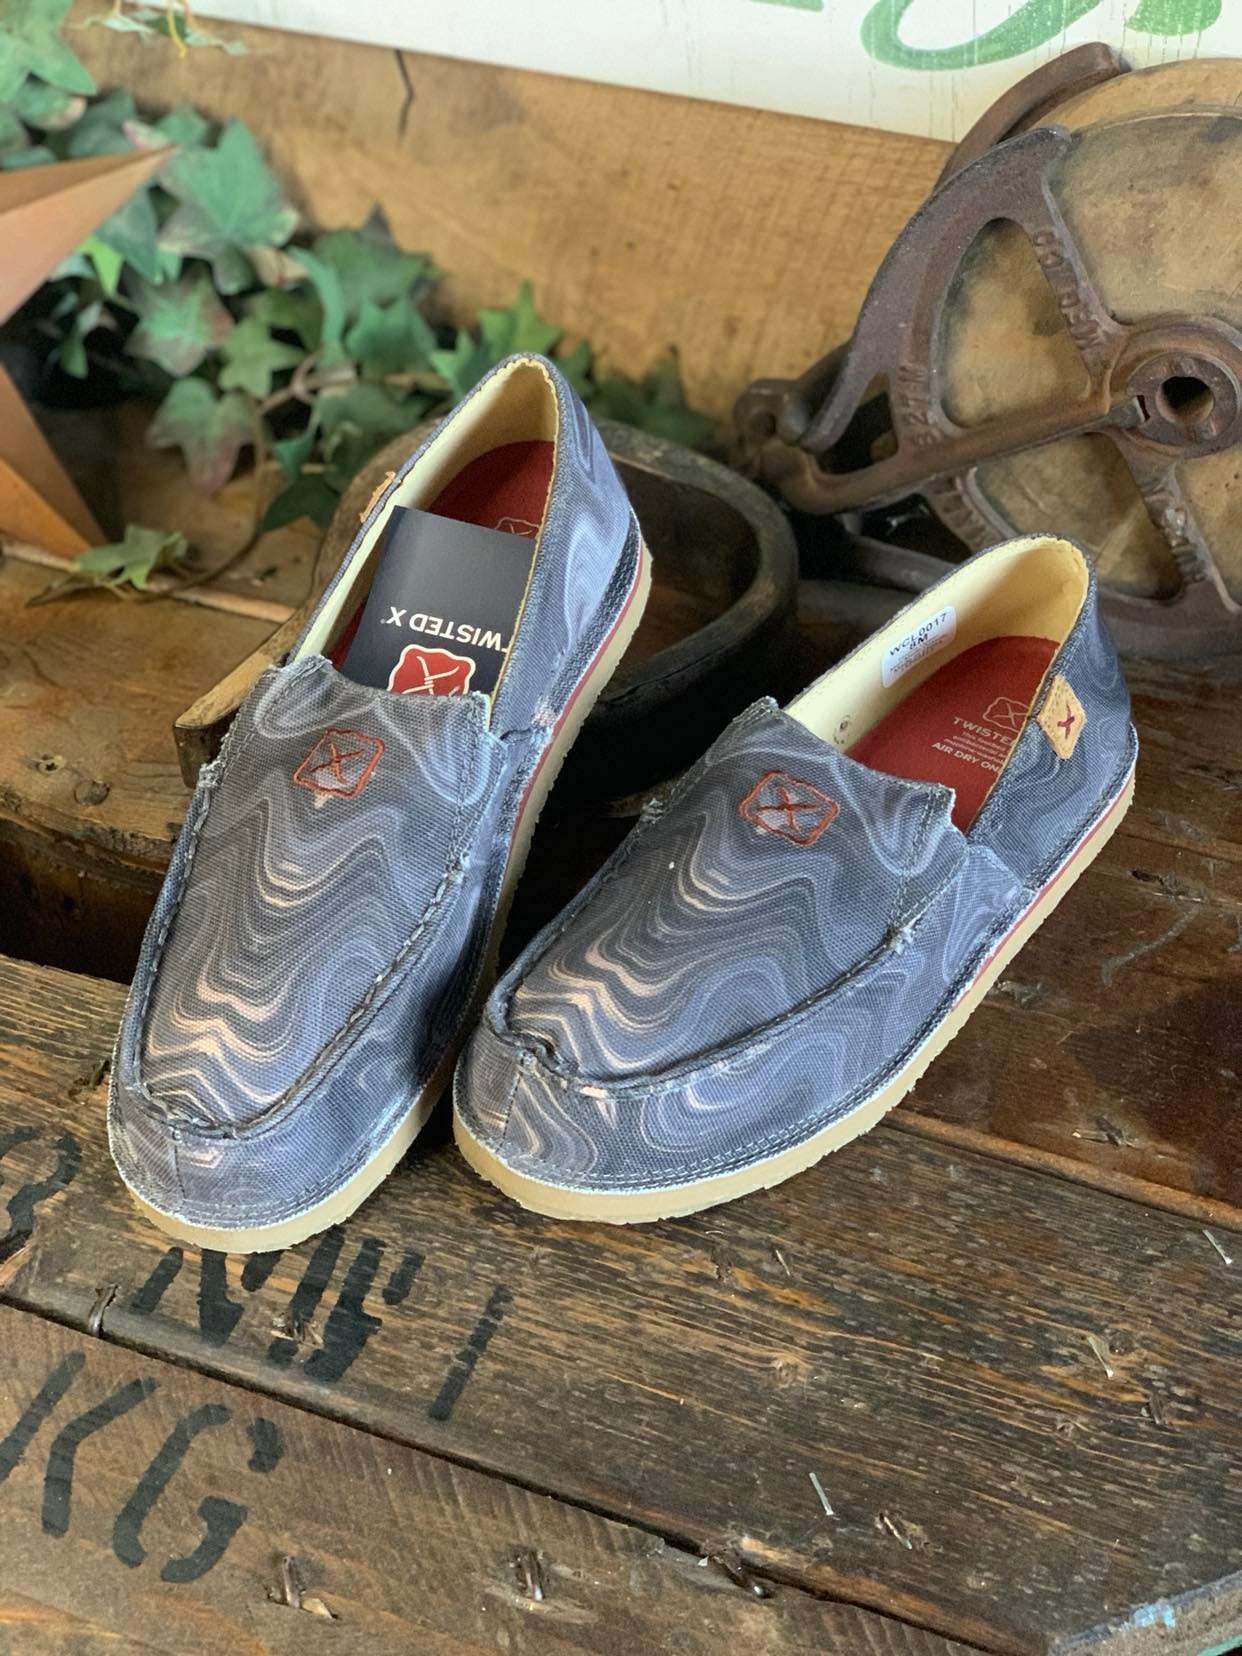 Twisted X Slip-on loafer in Grey Multi *FINAL SALE*-Twisted X Boots-Lucky J Boots & More, Women's, Men's, & Kids Western Store Located in Carthage, MO